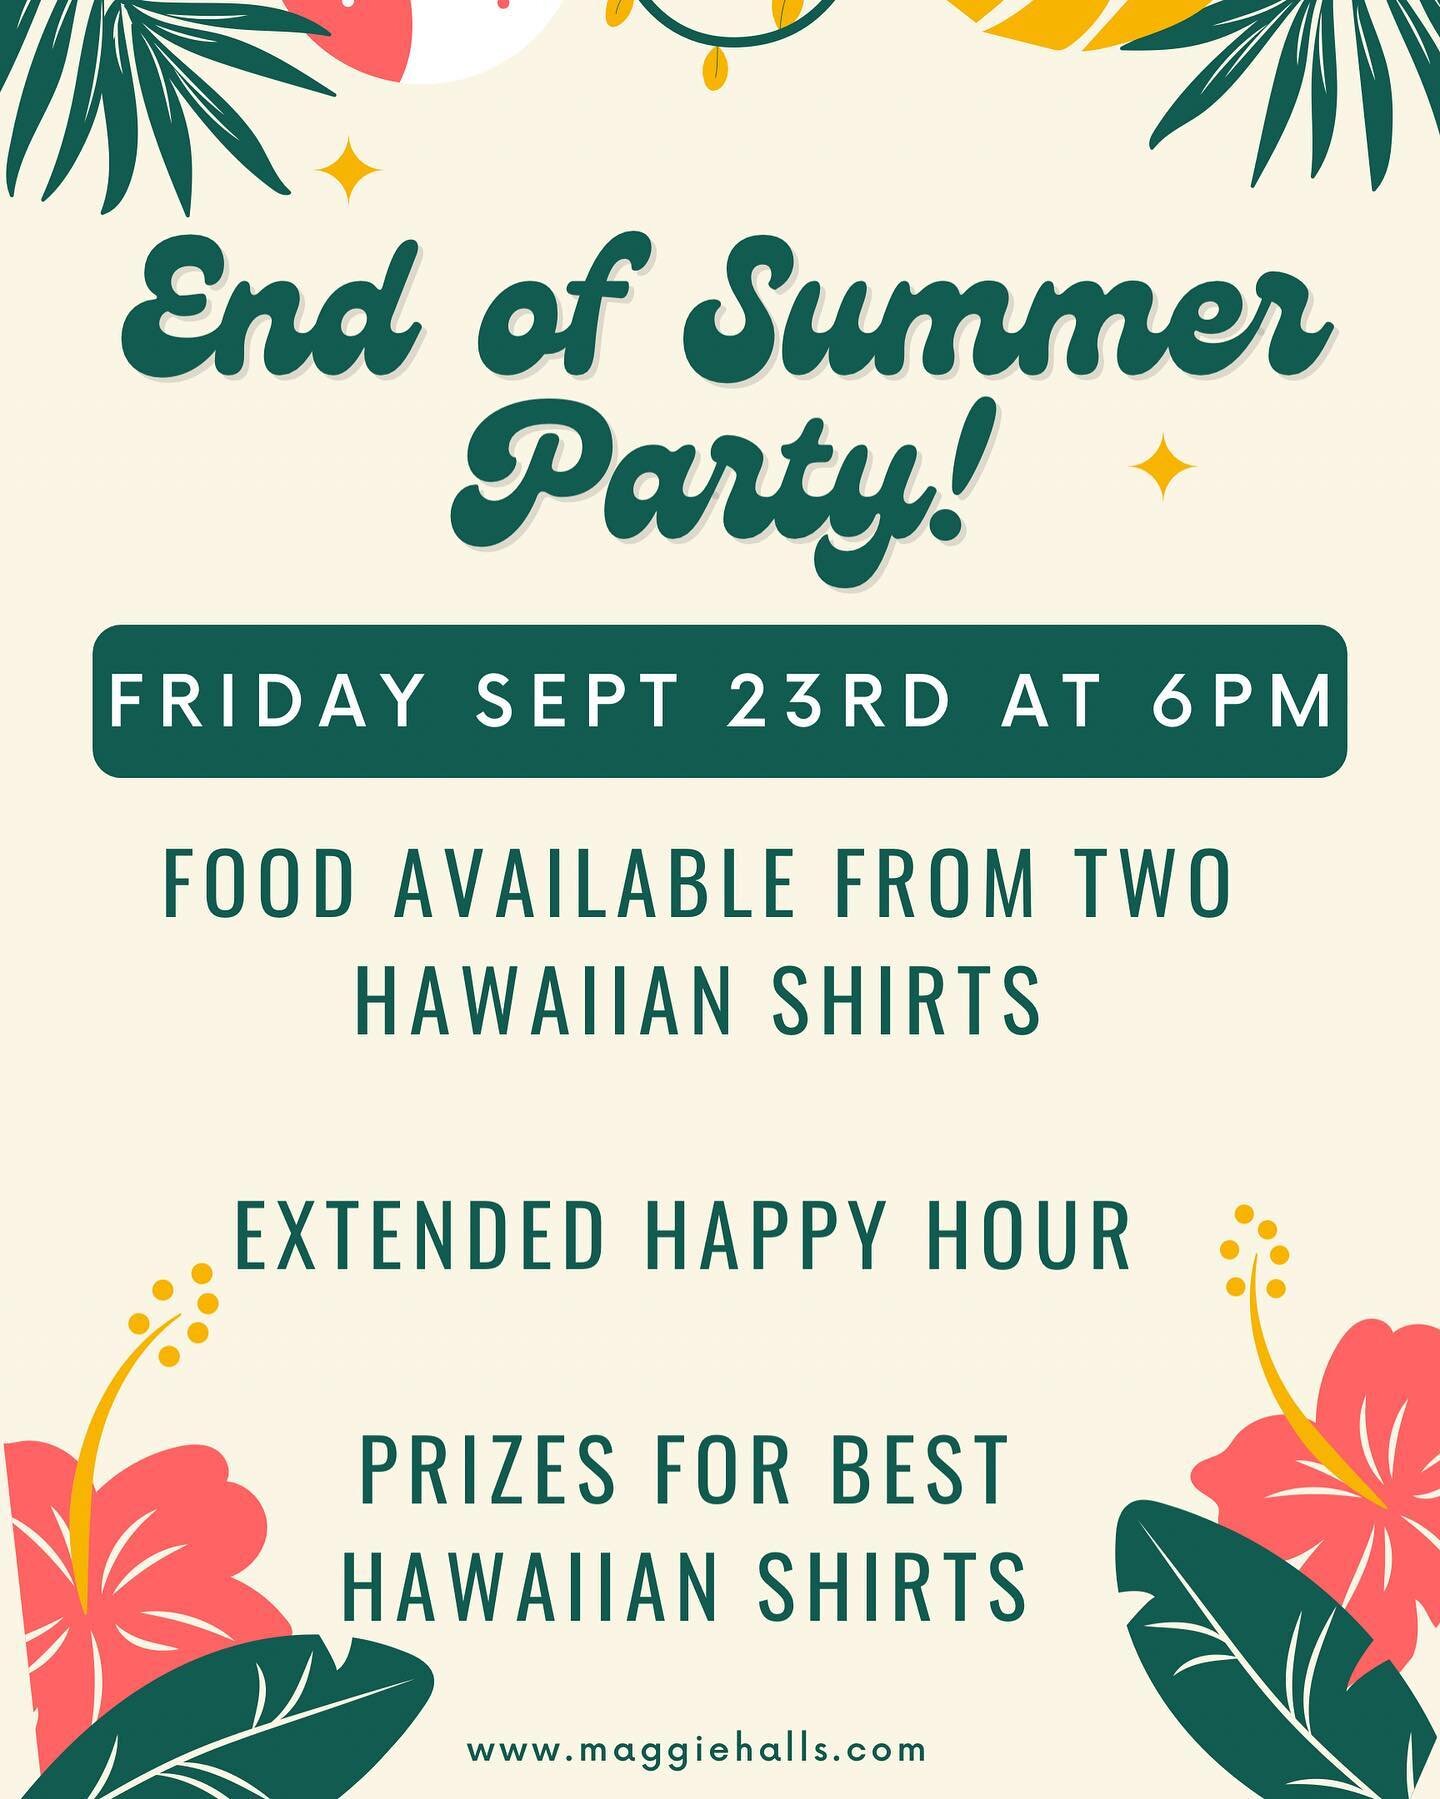 The amazing team from @twohawaiianshirts are back with us this Friday to help say goodbye to summer and hello to fall! We are extending our happy hour, selling killer Hawaiian food, and giving away free beer and swag to those wearing the best Hawaiia